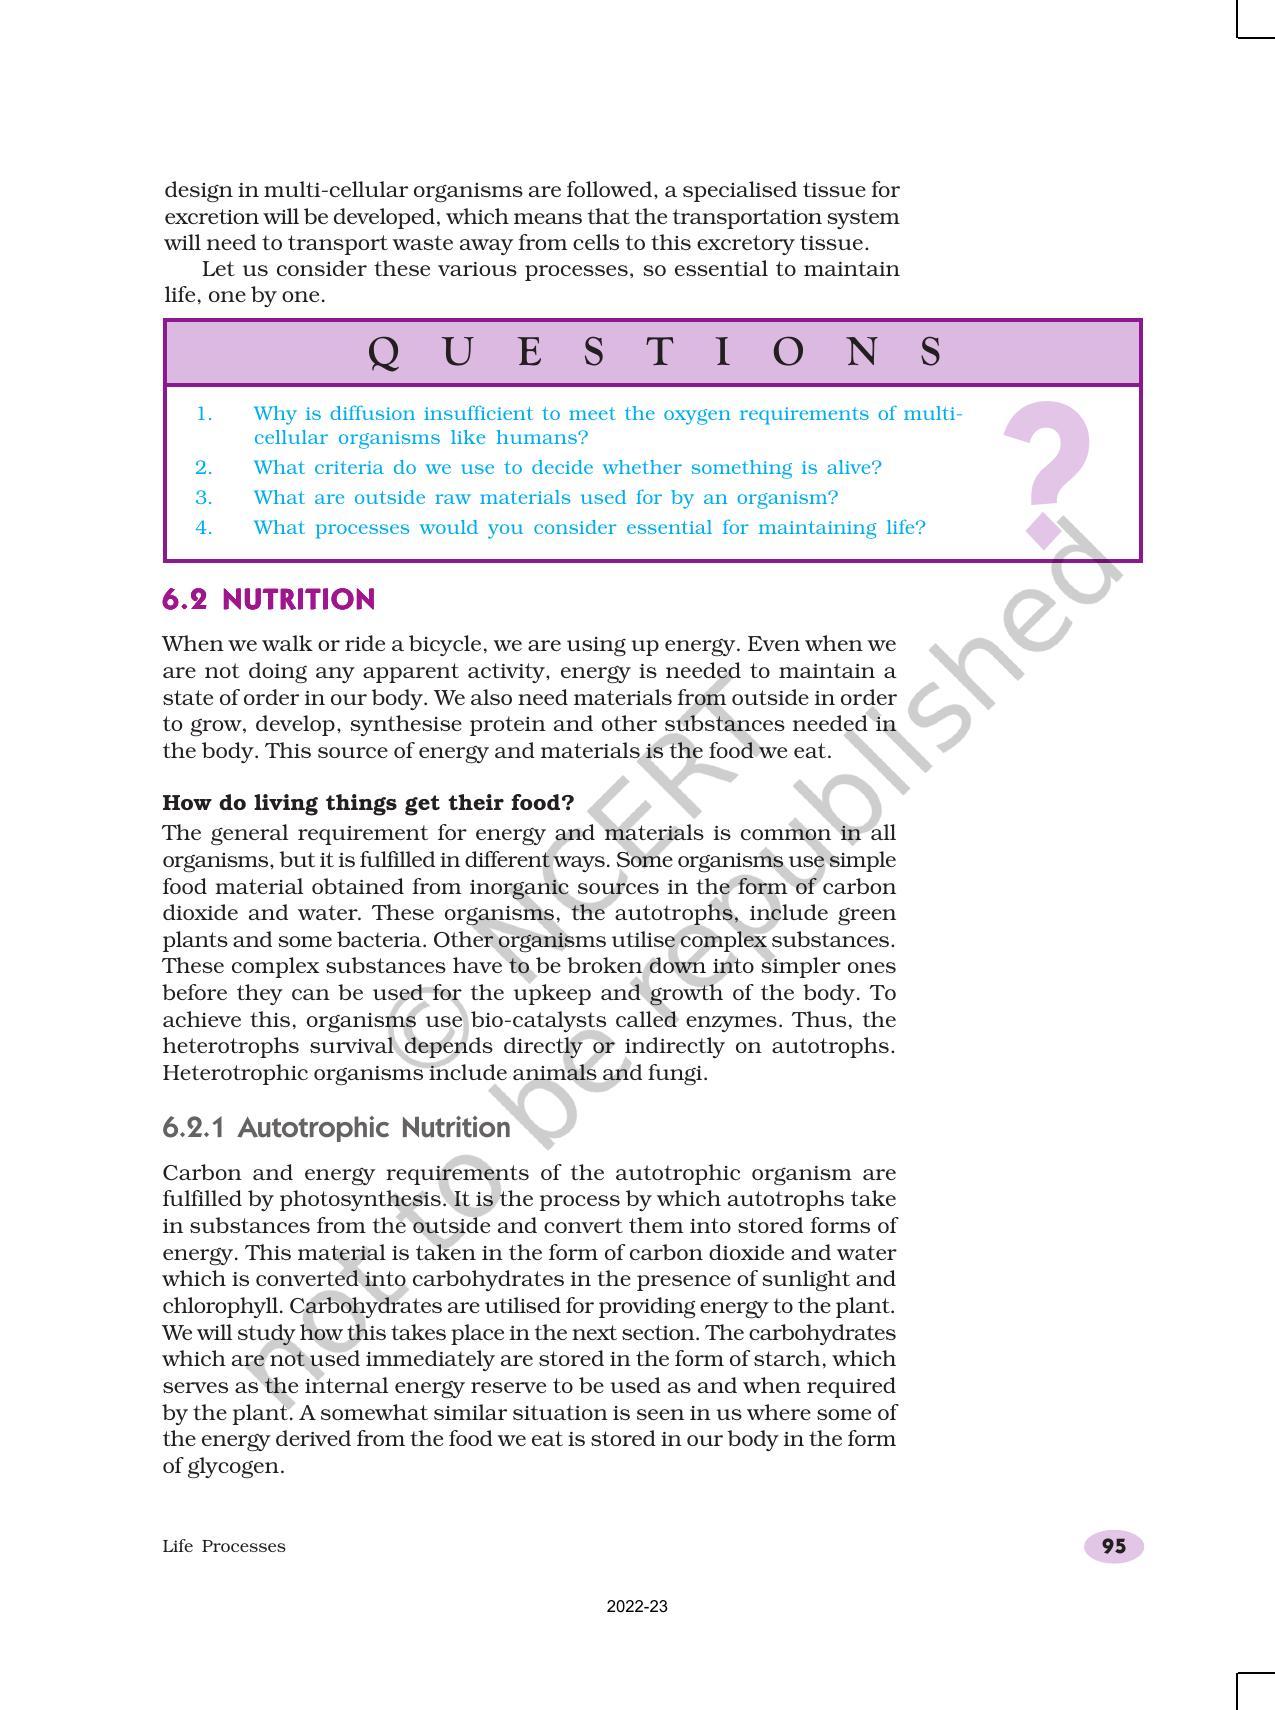 NCERT Book for Class 10 Science Chapter 6 Life Processes - Page 3